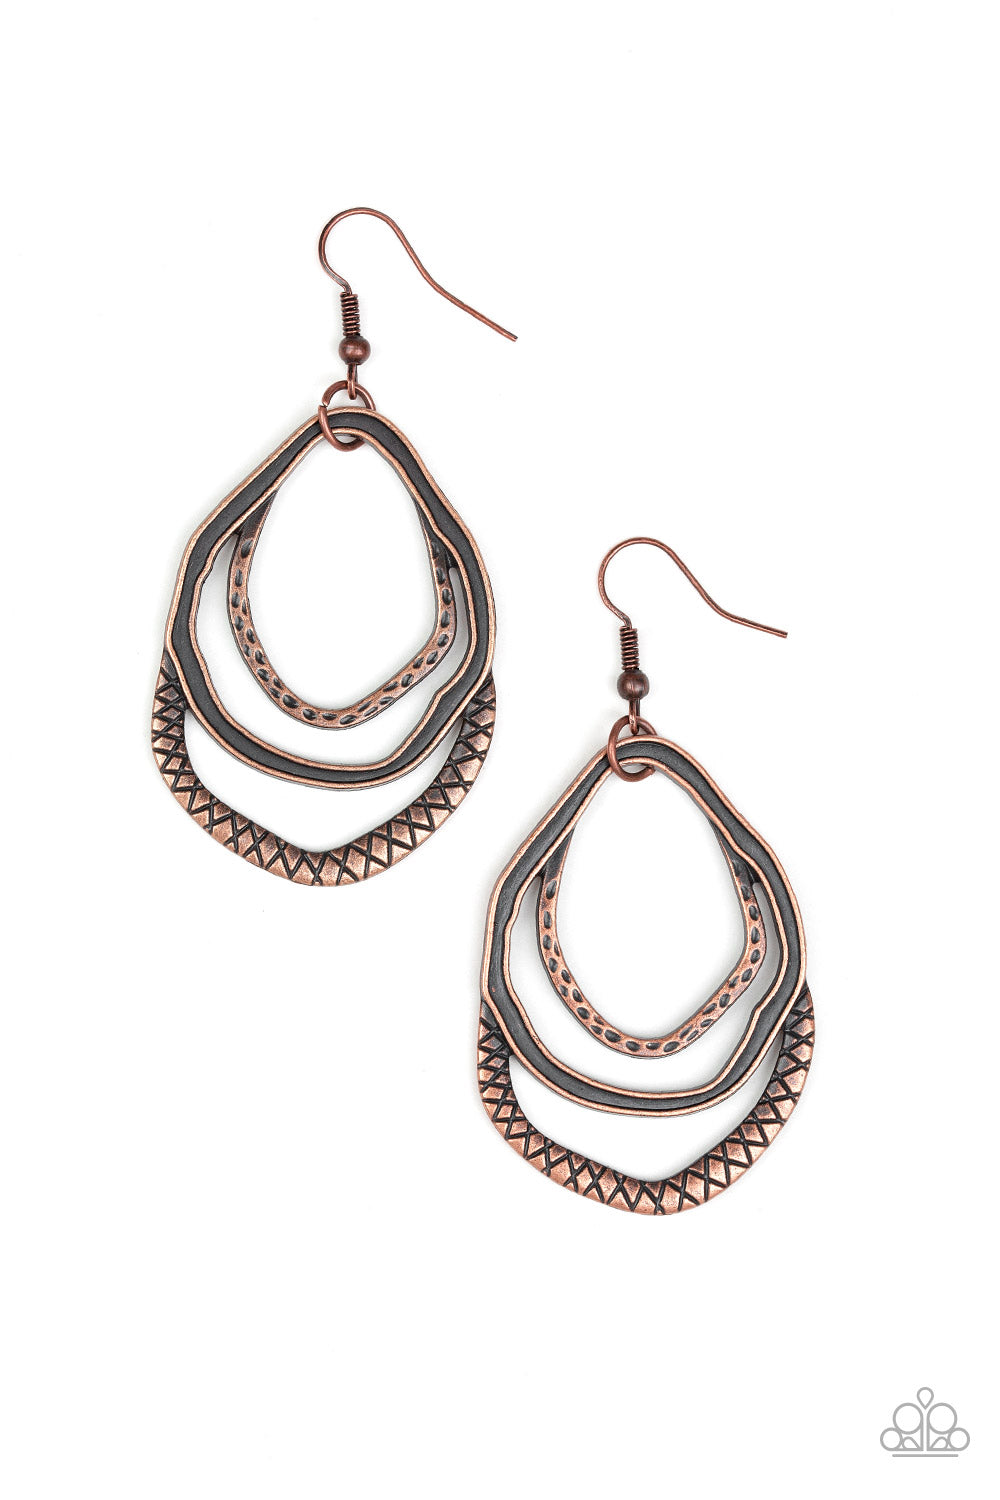 shop-sassy-affordable- canyon-casual-copper-paparazzi-accessories